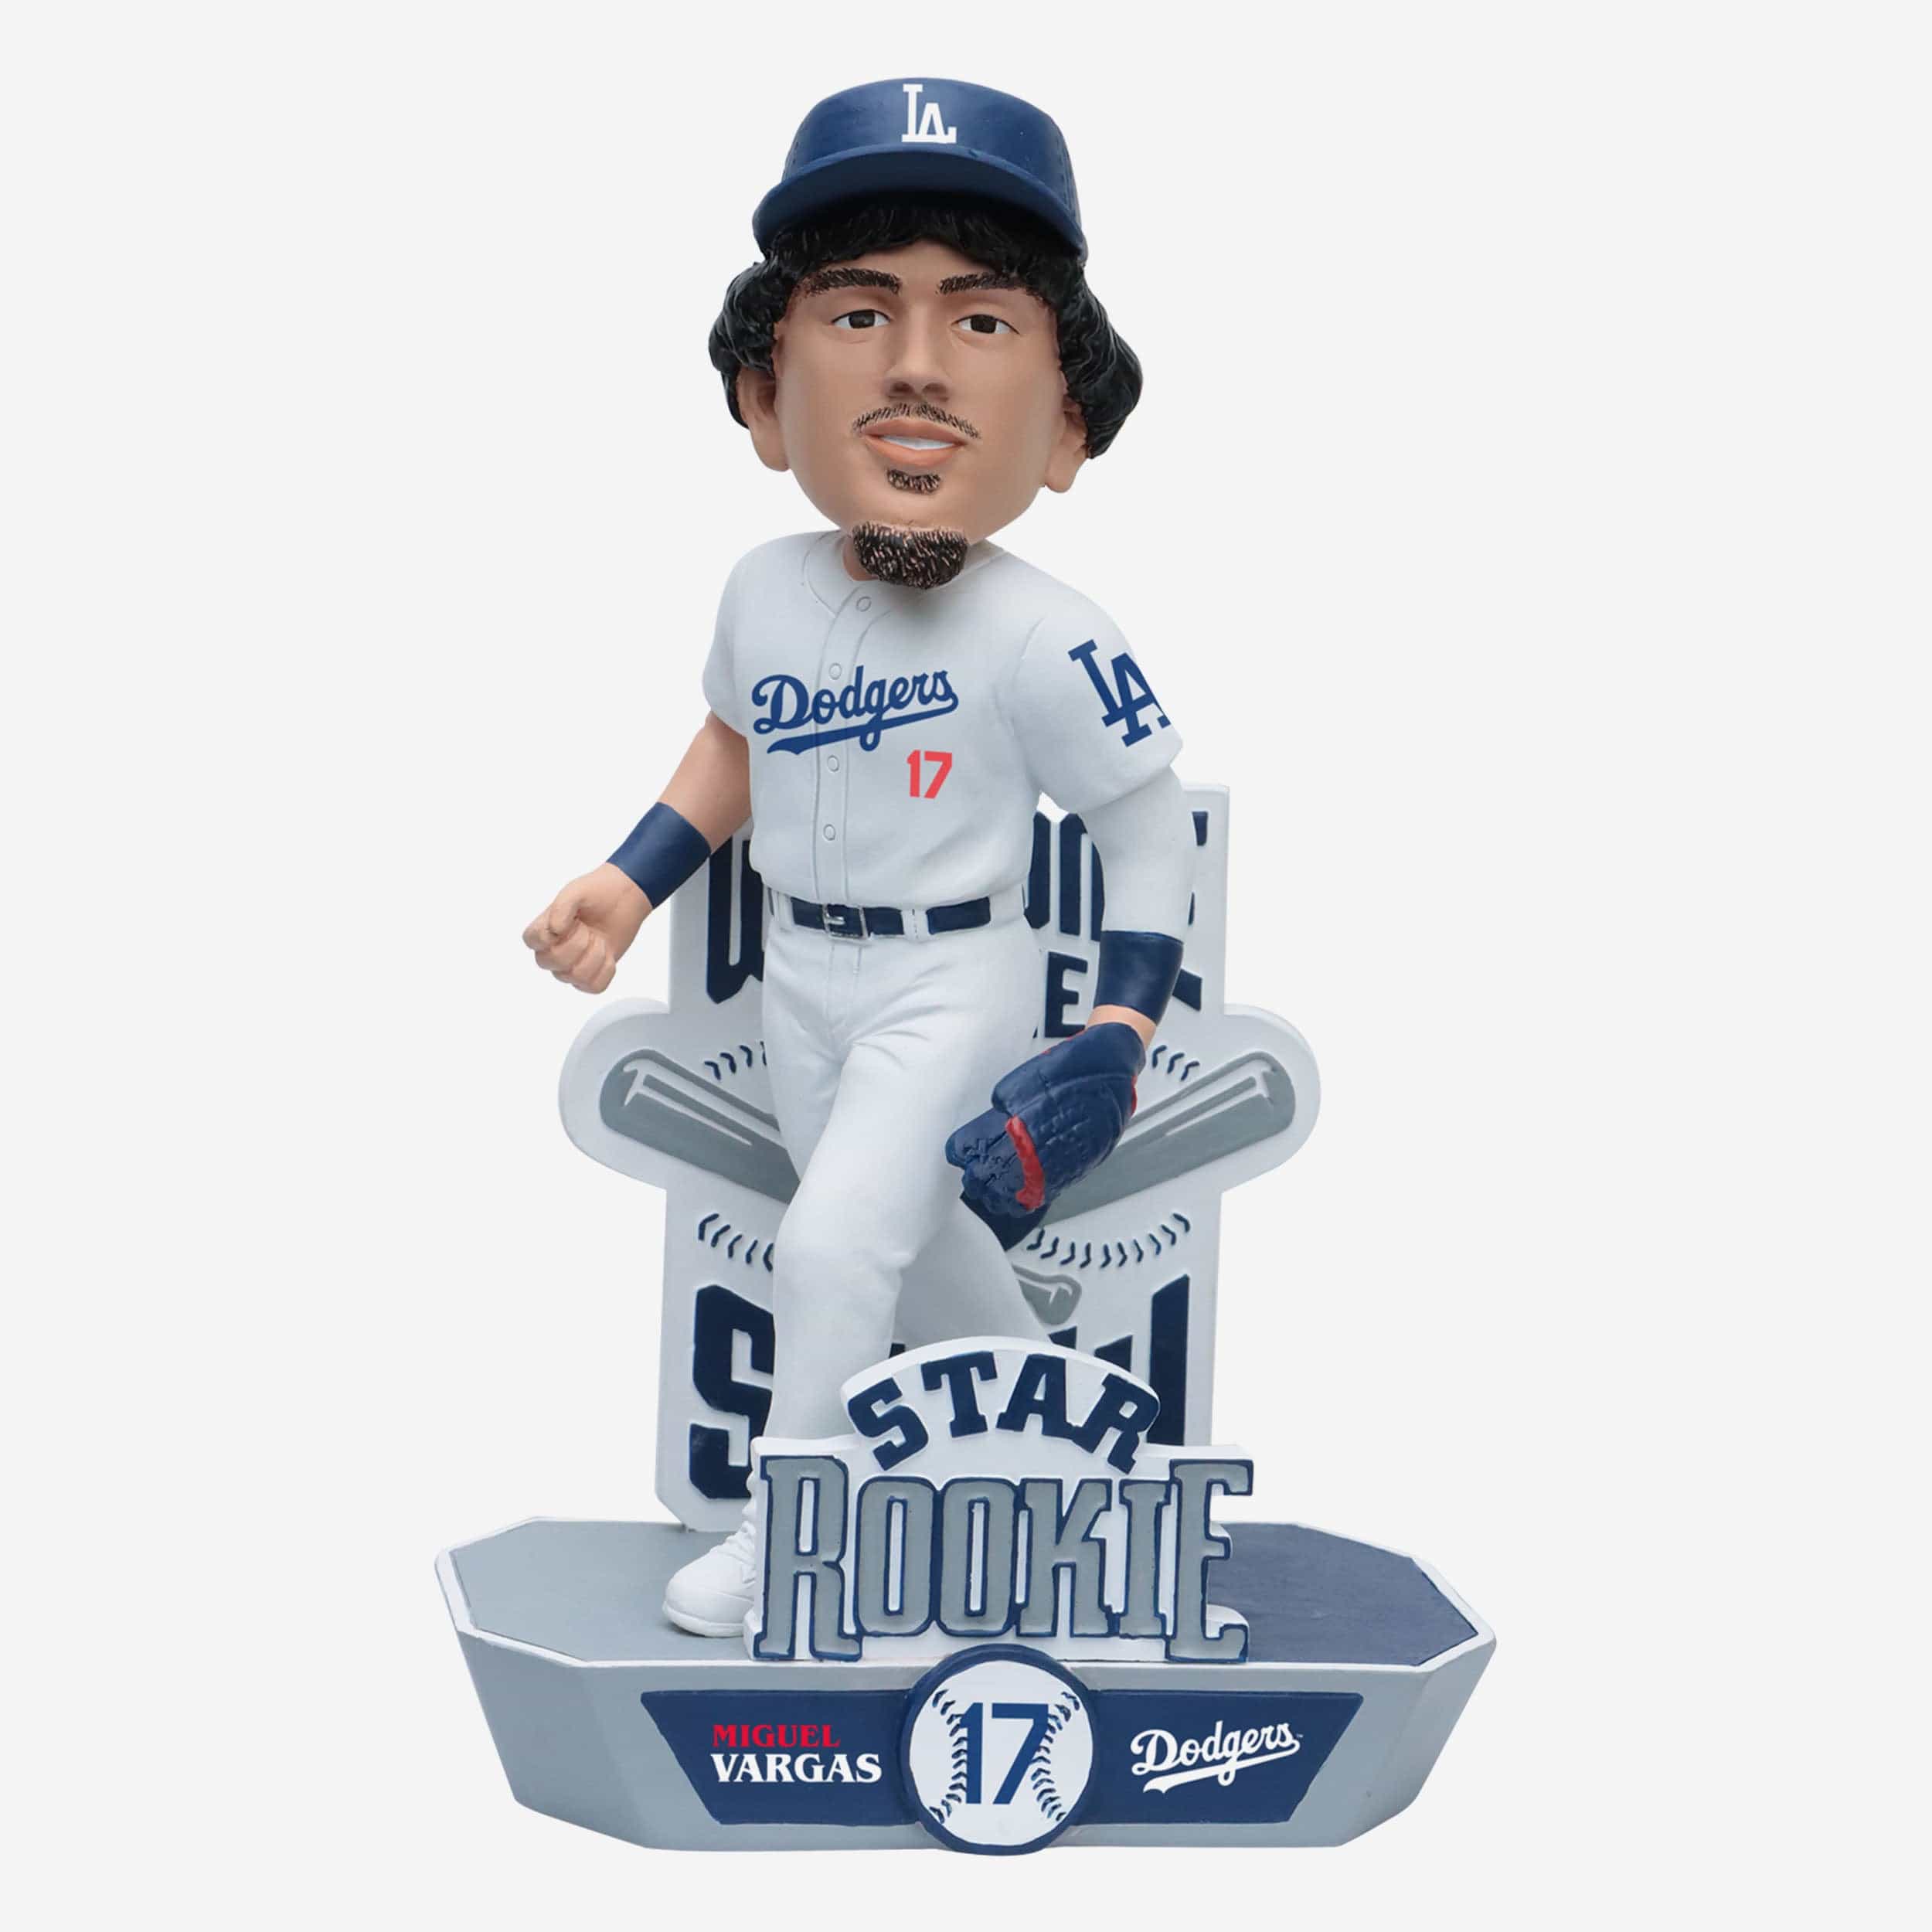 Miguel Vargas Los Angeles Dodgers Star Rookie Bobblehead Officially Licensed by MLB